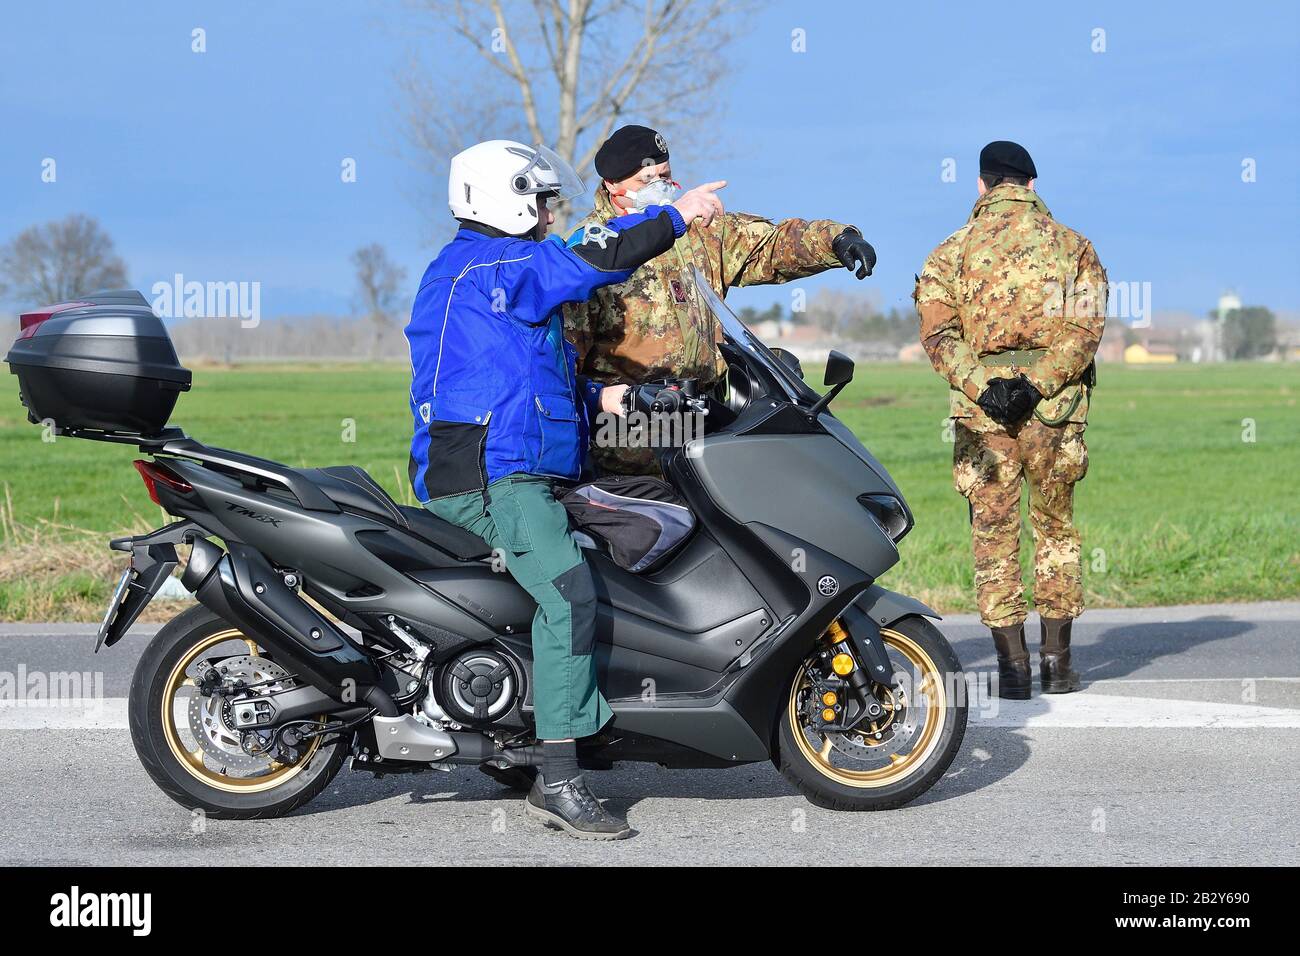 Turano Lodigiano. 4th Mar, 2020. Italian Army soldiers check transit to and from the cordoned areas in Turano Lodigiano, Italy, Feb. 27, 2020. Italian authorities on Tuesday confirmed 2,263 coronavirus cases, which marked an increase of 428 infections compared to the previous day. The figure did not include recoveries or fatalities, whose numbers were provided separately. Credit: Xinhua/Alamy Live News Stock Photo